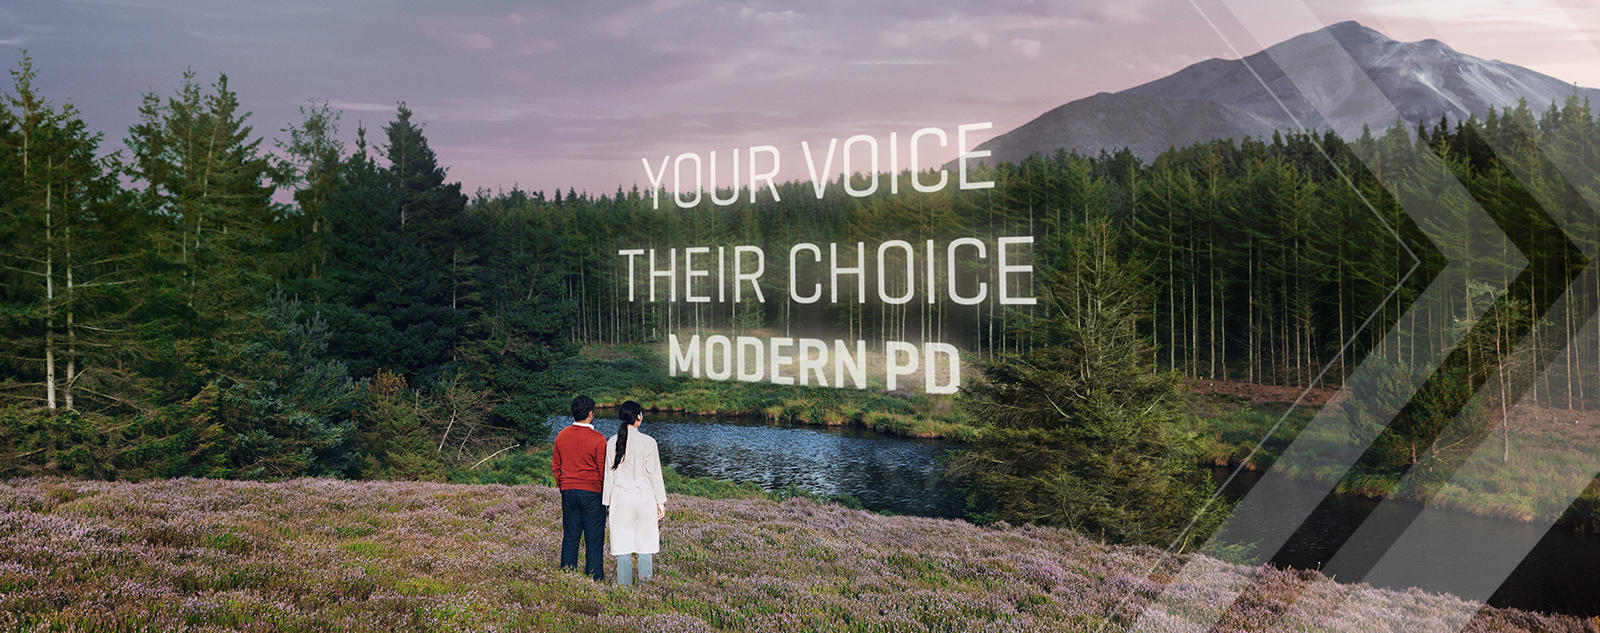 'Your voice. Their choice. Modern PD' graphic